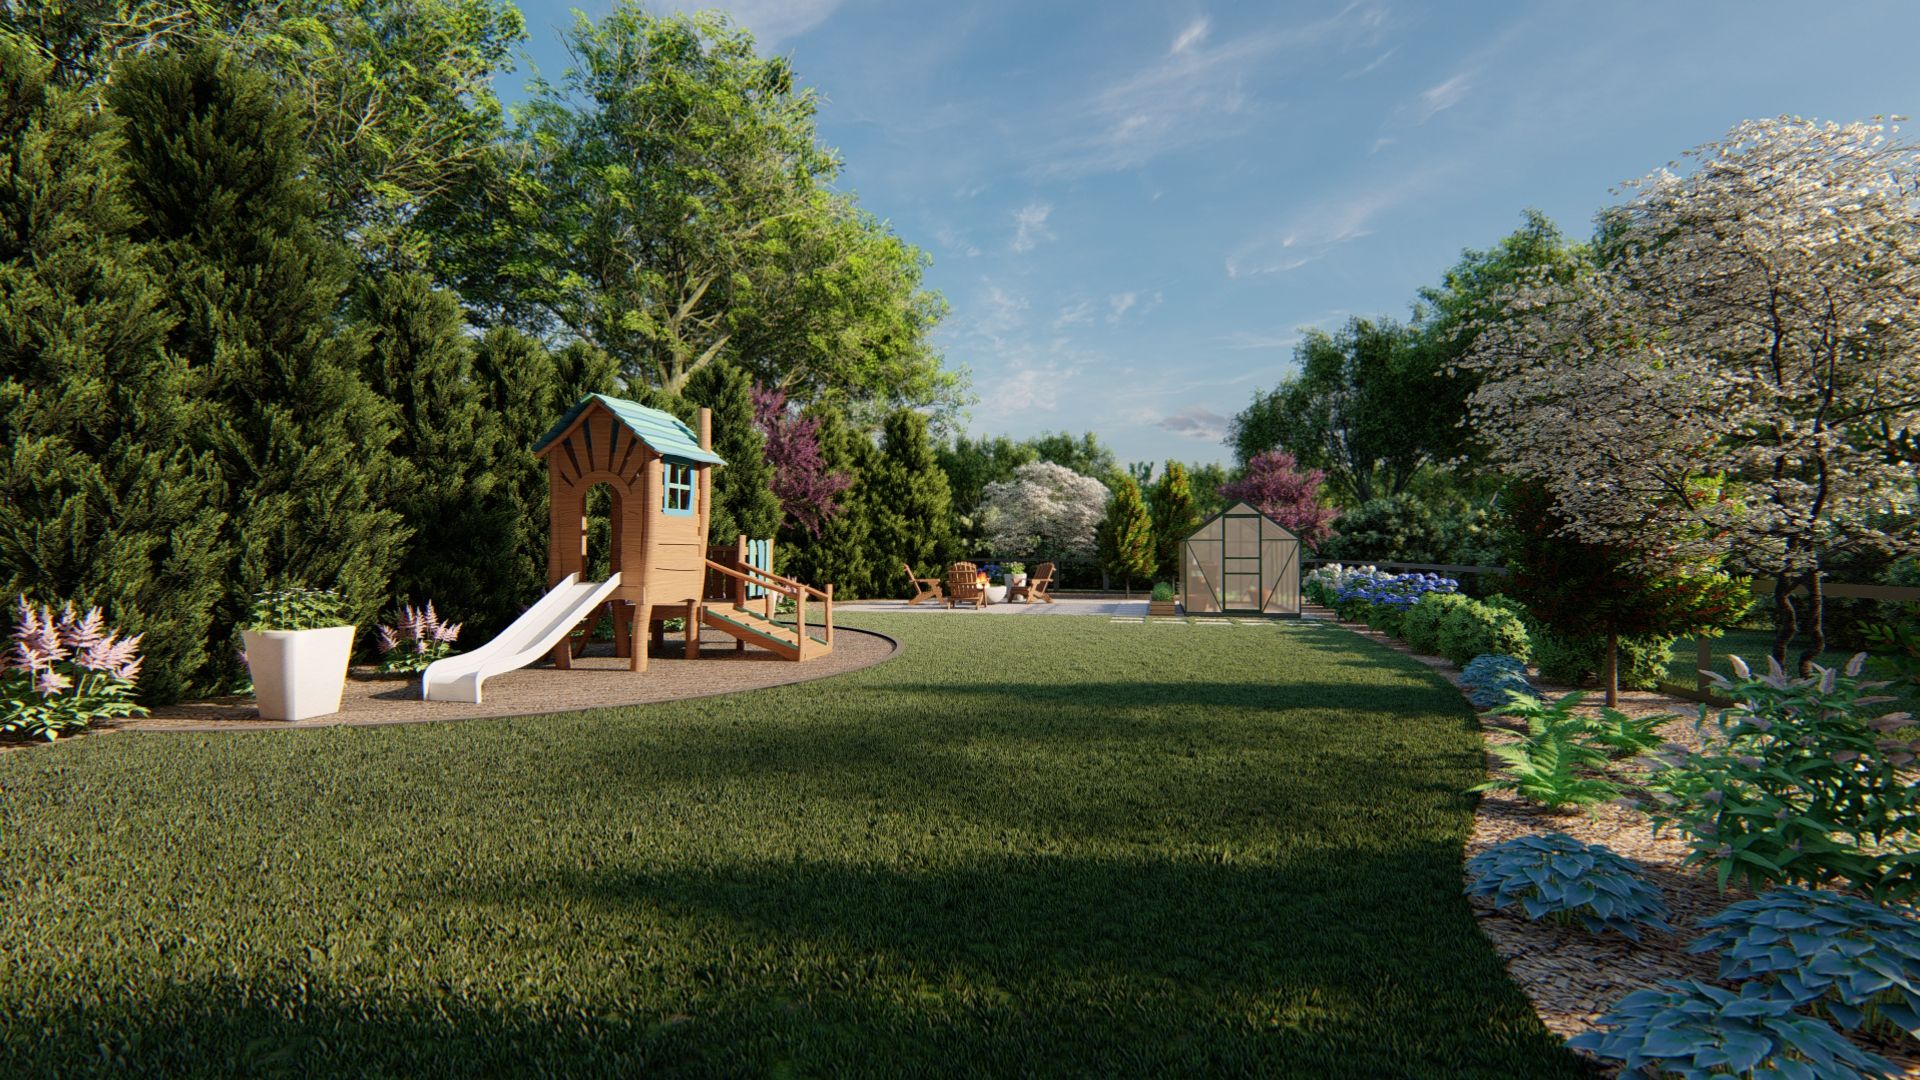 A 3D rendering of a backyard with a playlet by a Tilly landscape designer